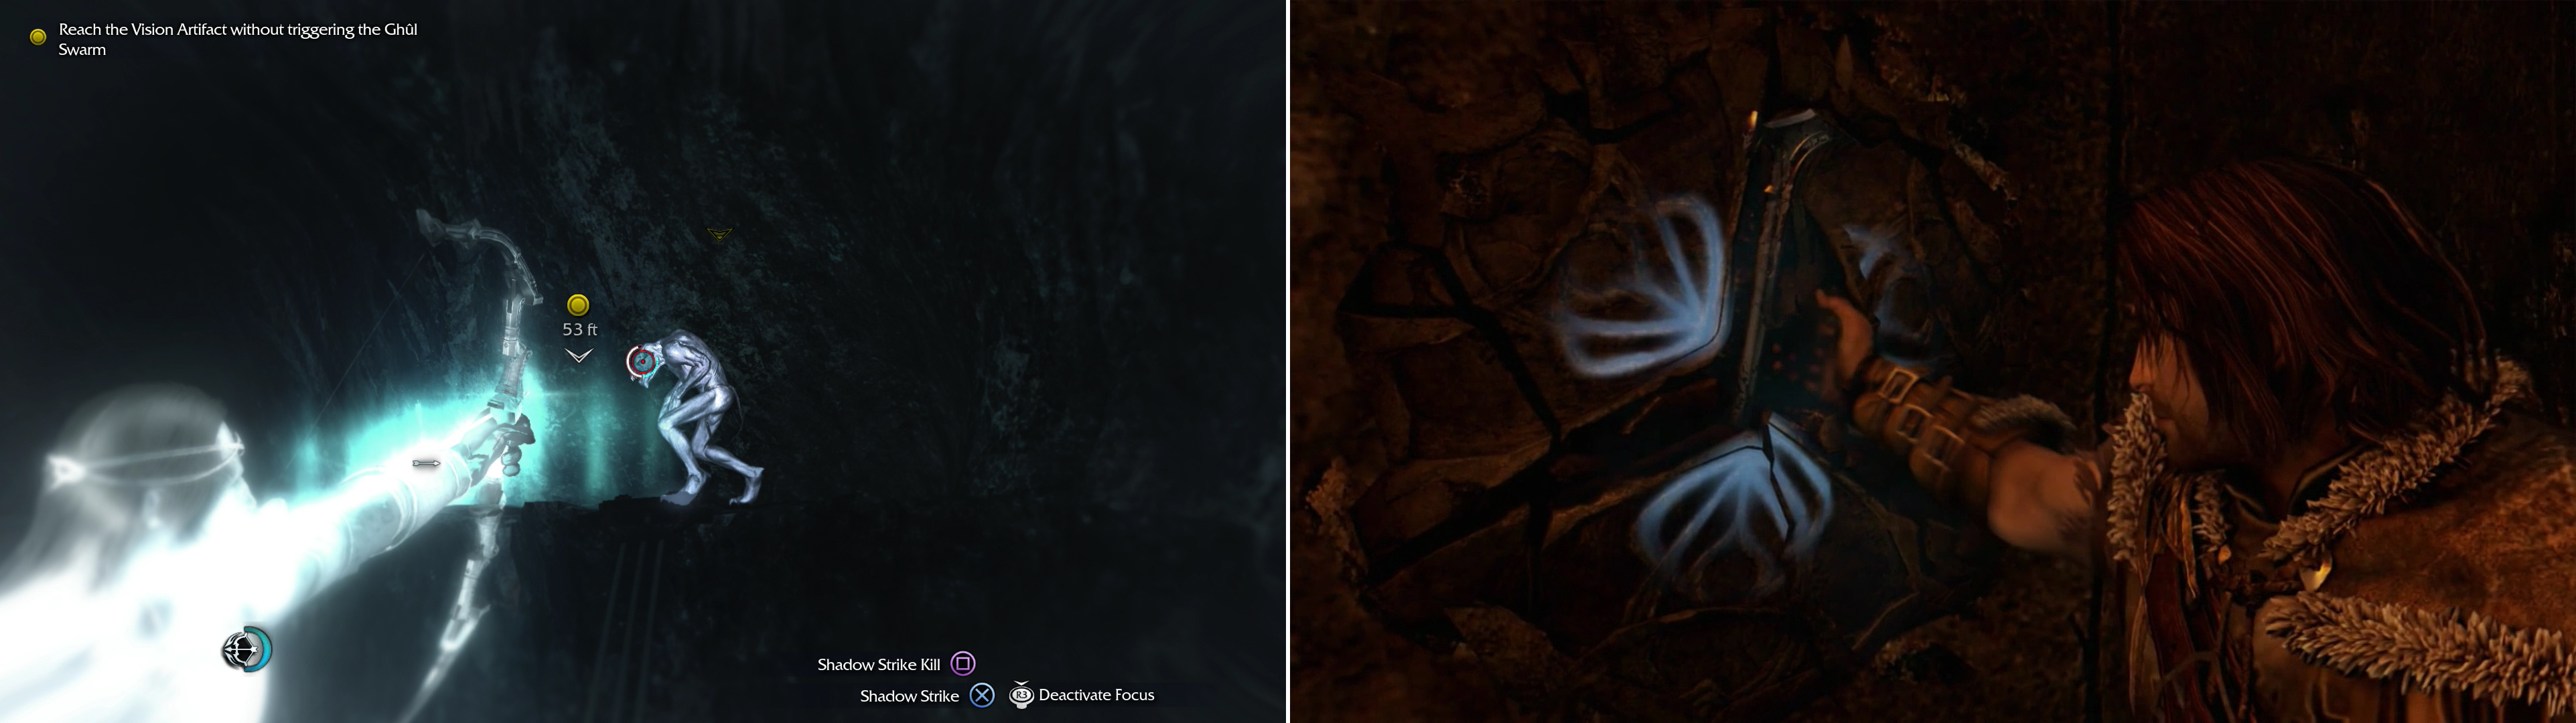 Keep to high ground wherever possible and follow the trail through the cave, avoiding the Ghuls. You should only need to kill one Ghul near the end of your path (left). Grab Celebrimbor's hammer to witness another vision (right).